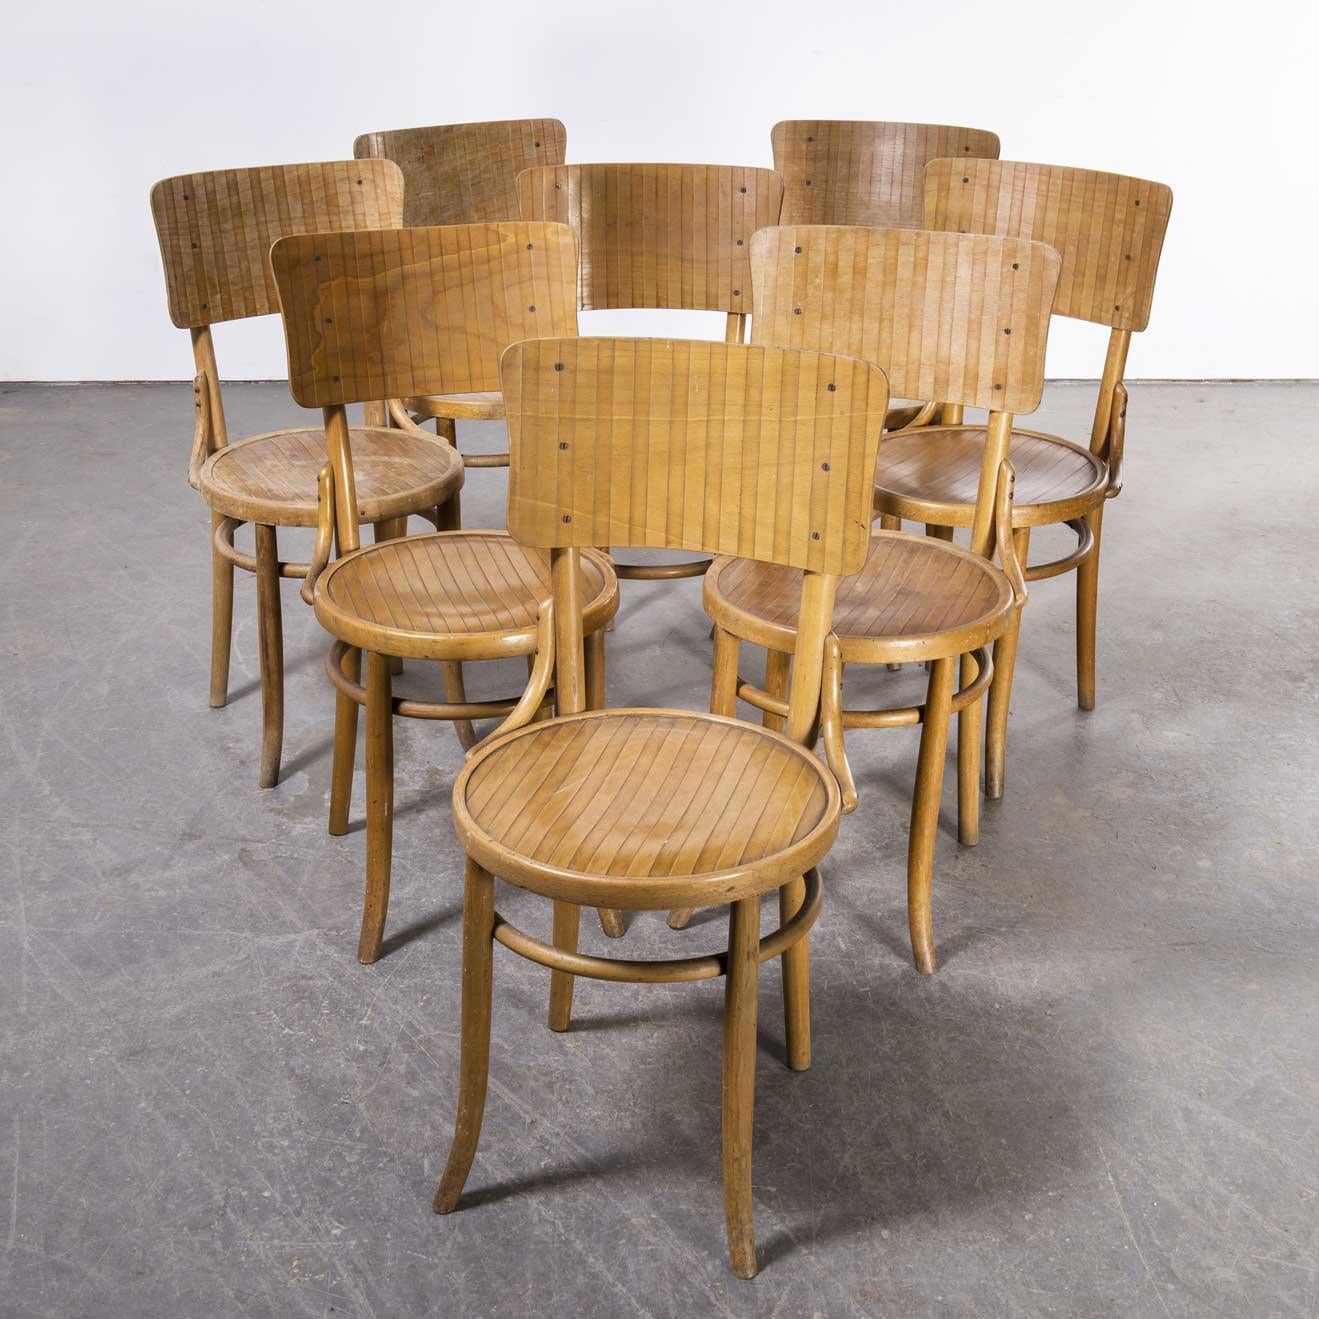 1950’s Bentwood Debrecen dining chairs – Set of eight (1683.6)
1950’s Bentwood Debrecen dining chairs – Set of eight. It is hard to be precise about the origin of these chairs as little history is known, but what we do know is at the beginning of